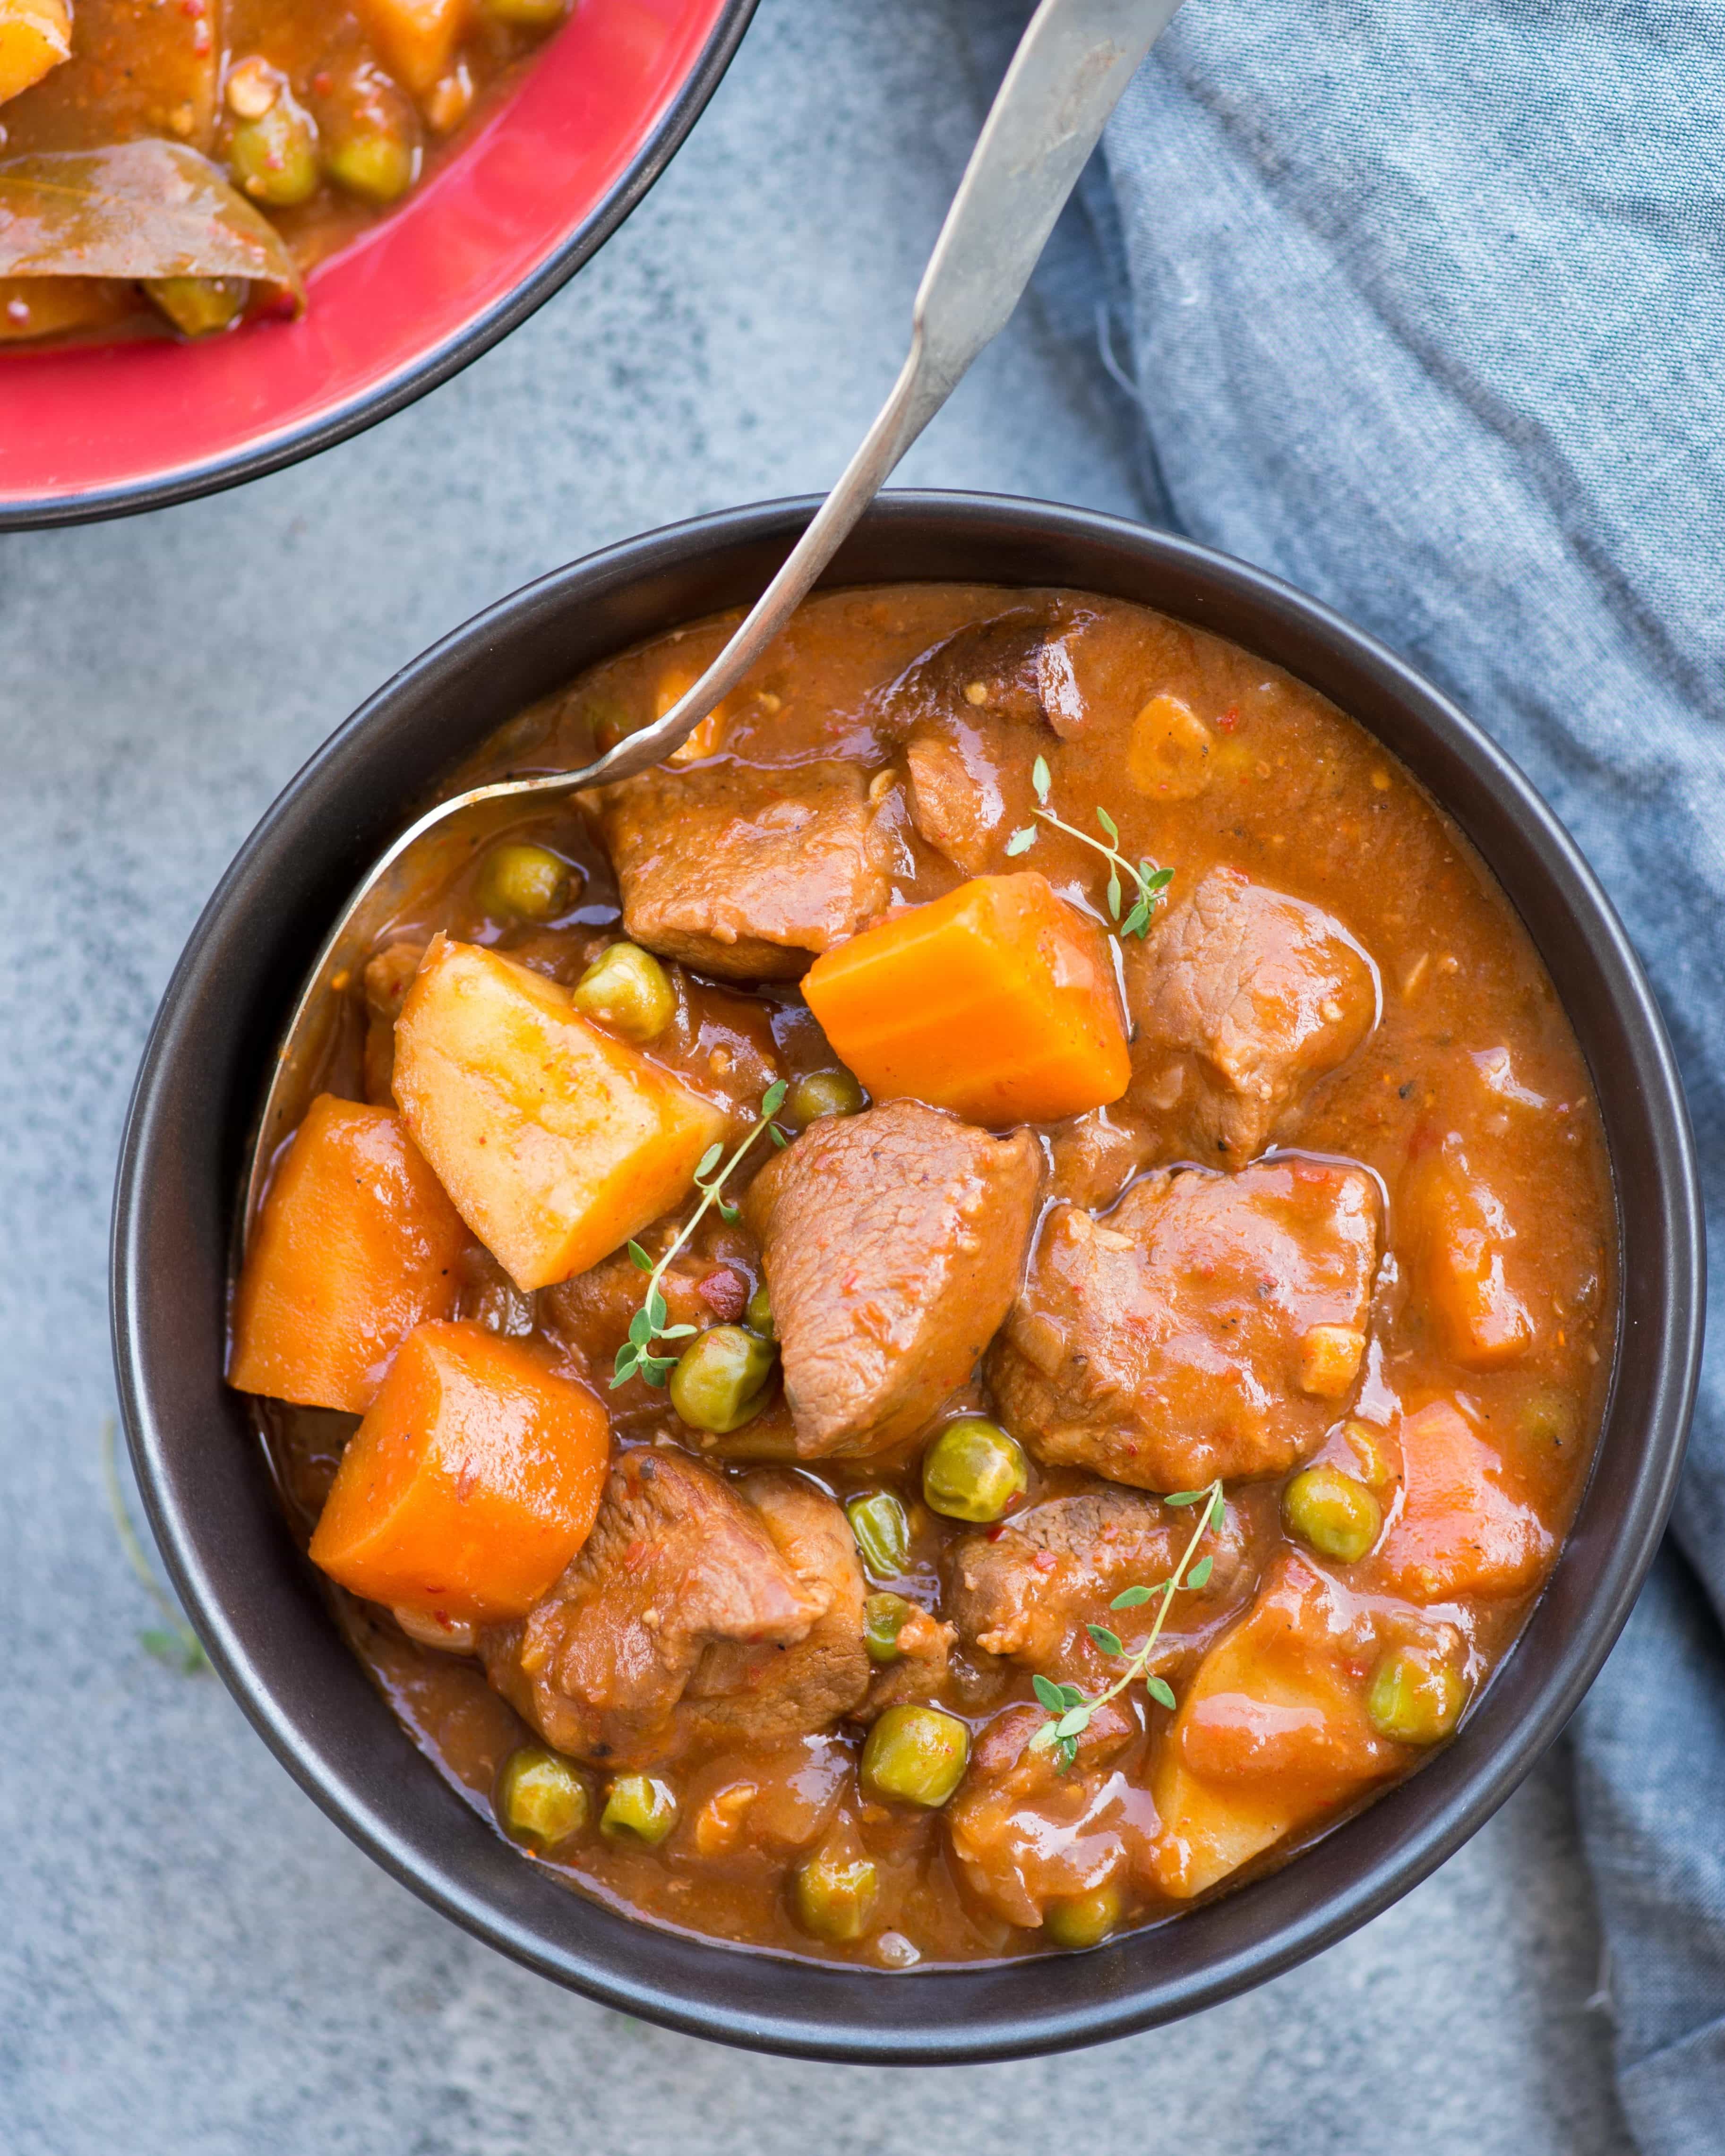 Slow Cooker Lamb Stew with tender fall apart lamb chunks and hearty vegetables have a rustic flavourful wine based gravy. This Lamb Stew is definitely going to keep you warm in the winter.